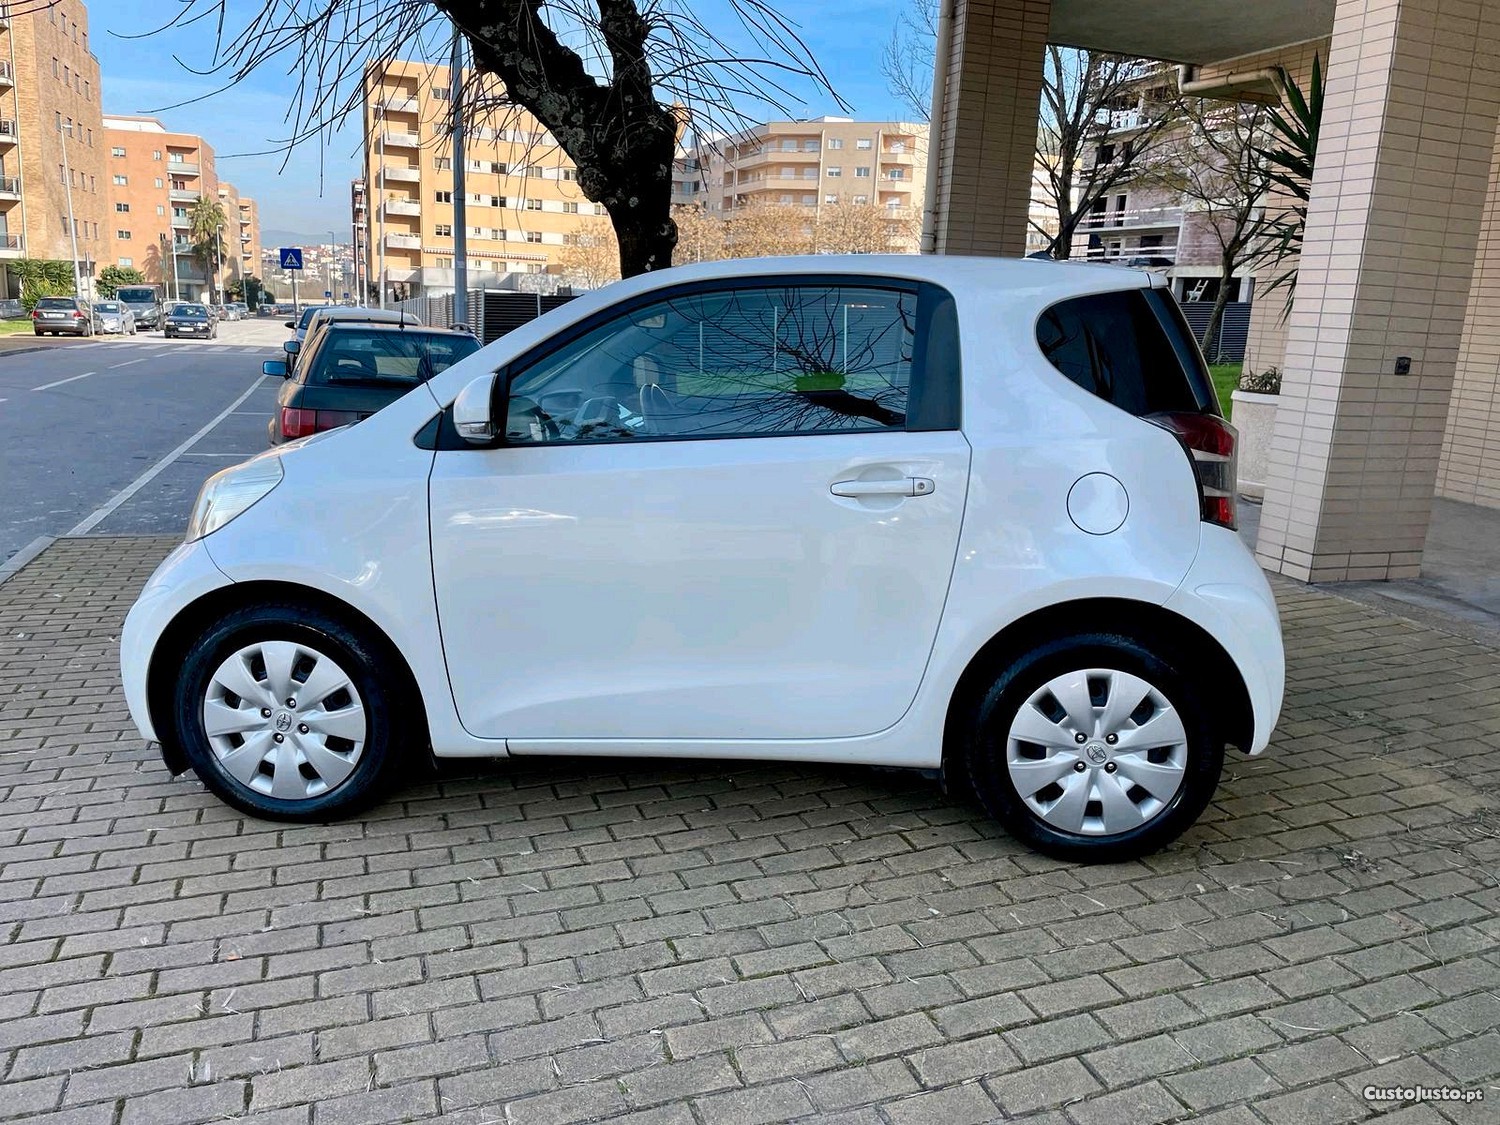 Toyota iQ diesel 4 lugares 1.4 d4d